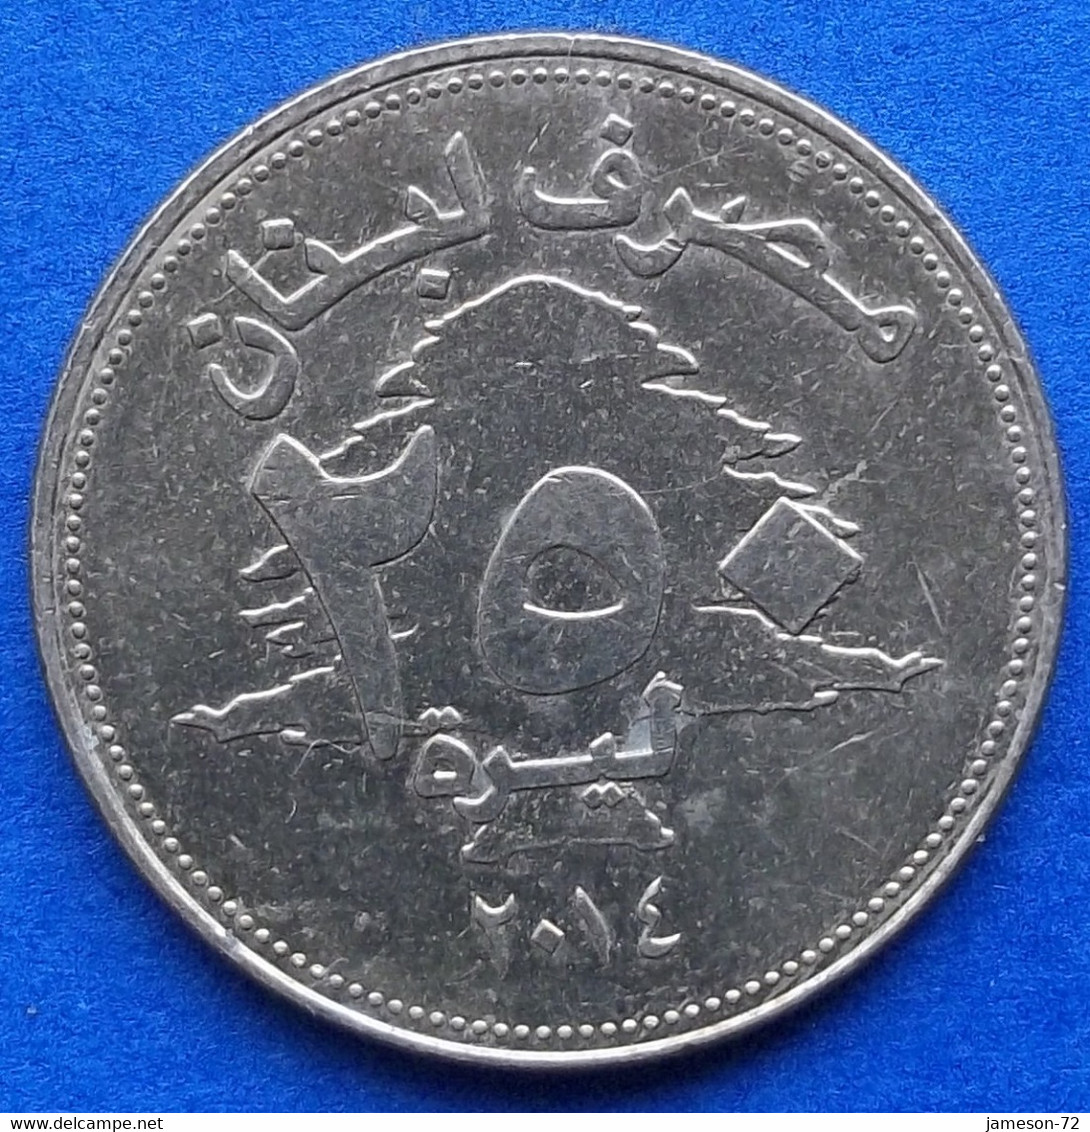 LEBANON - 250 Livres 2014 KM# 36 Independent Republic - Edelweiss Coins - Libano